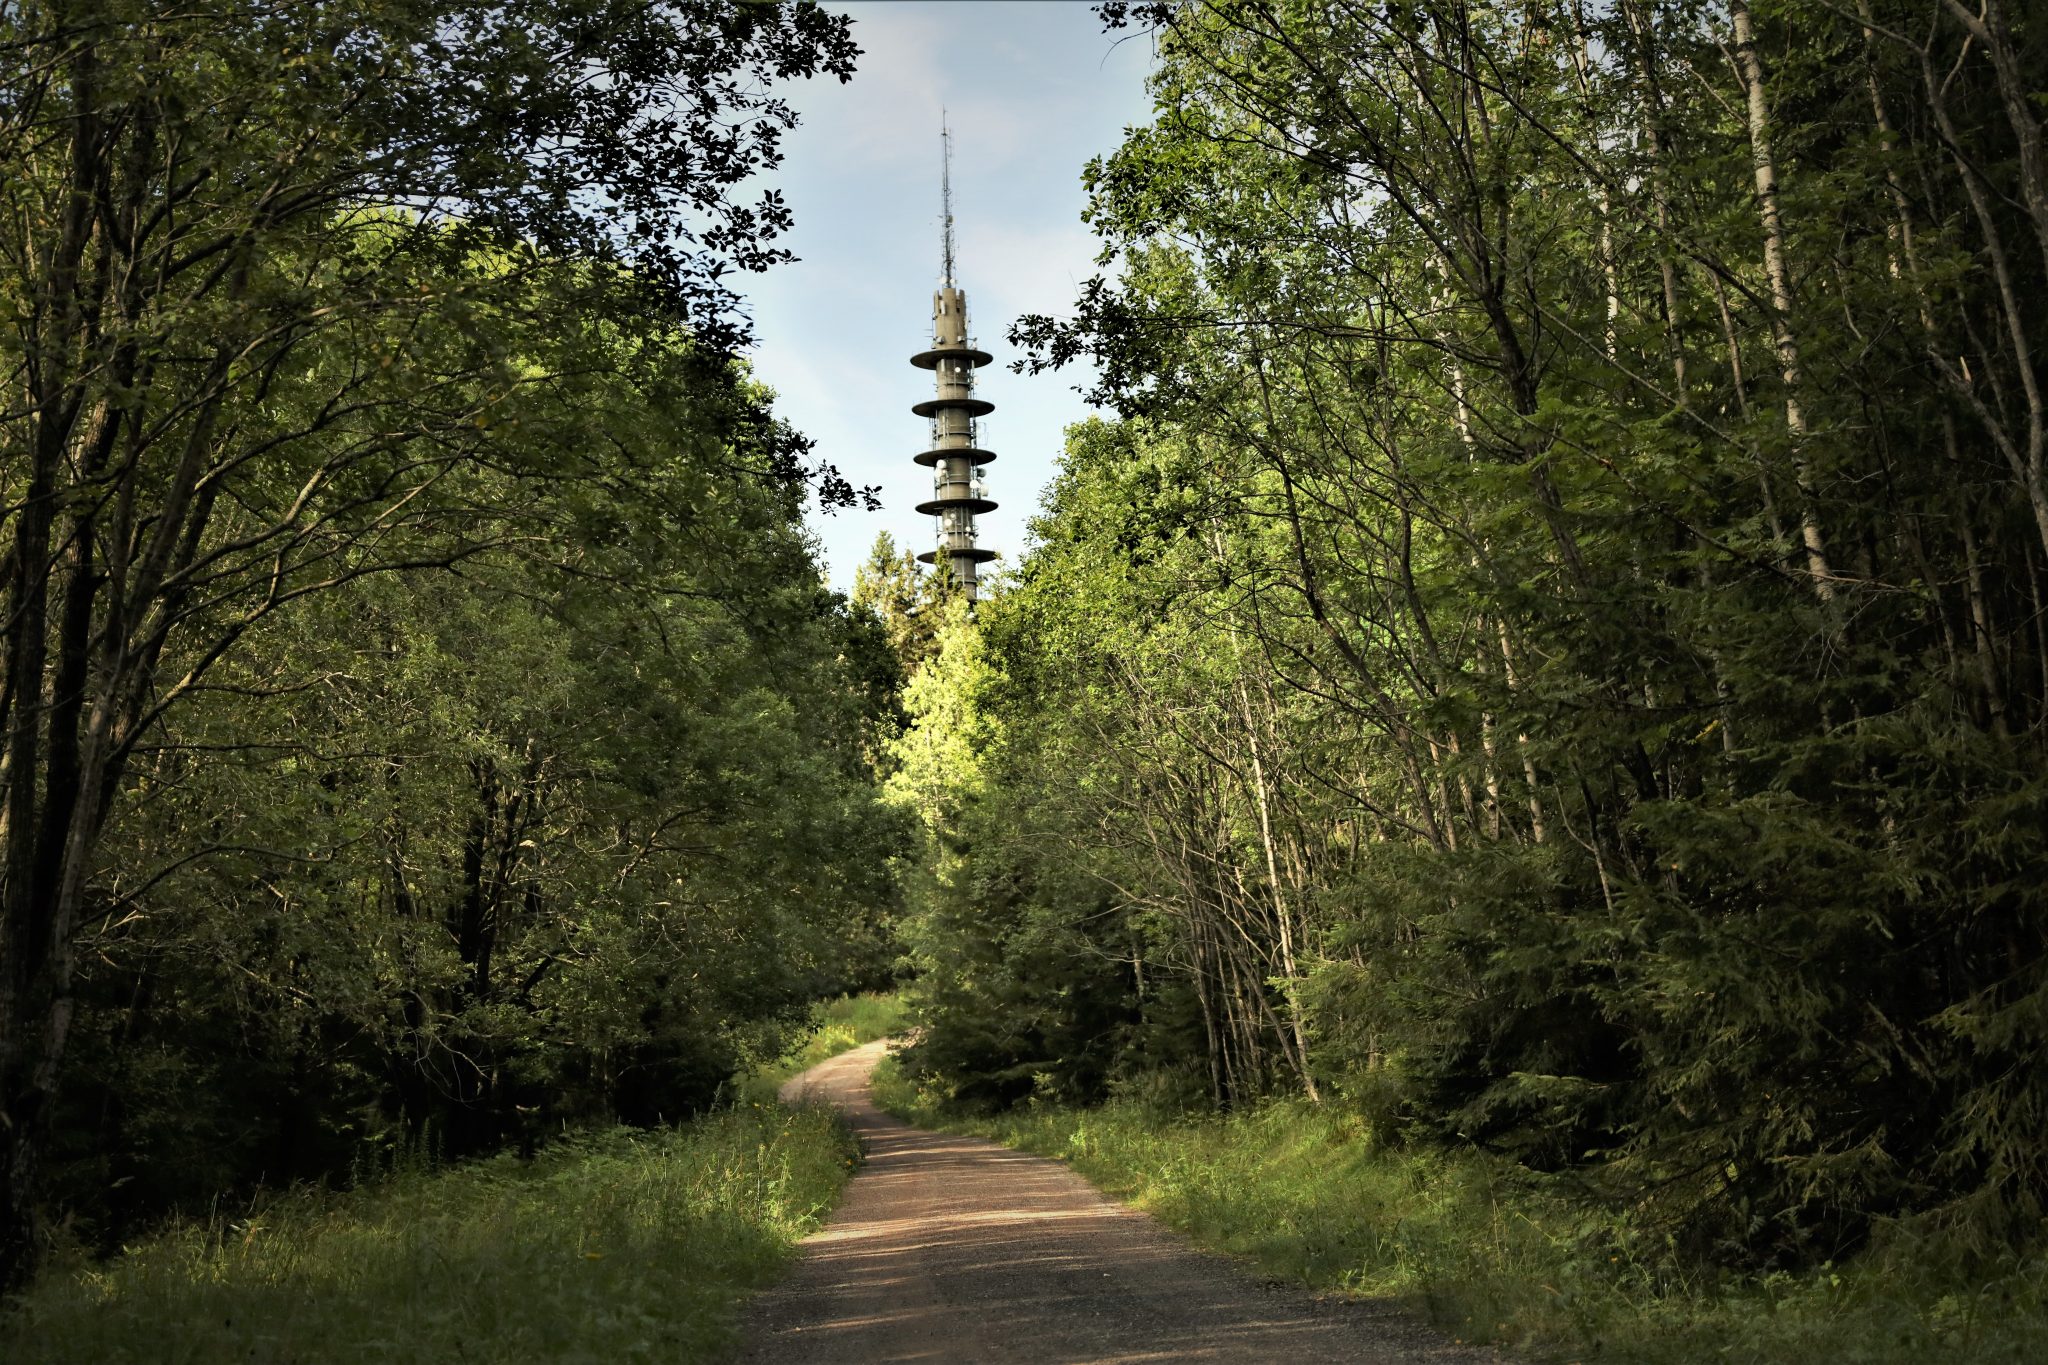 Base station surrounded by green trees in Oslo, Norway